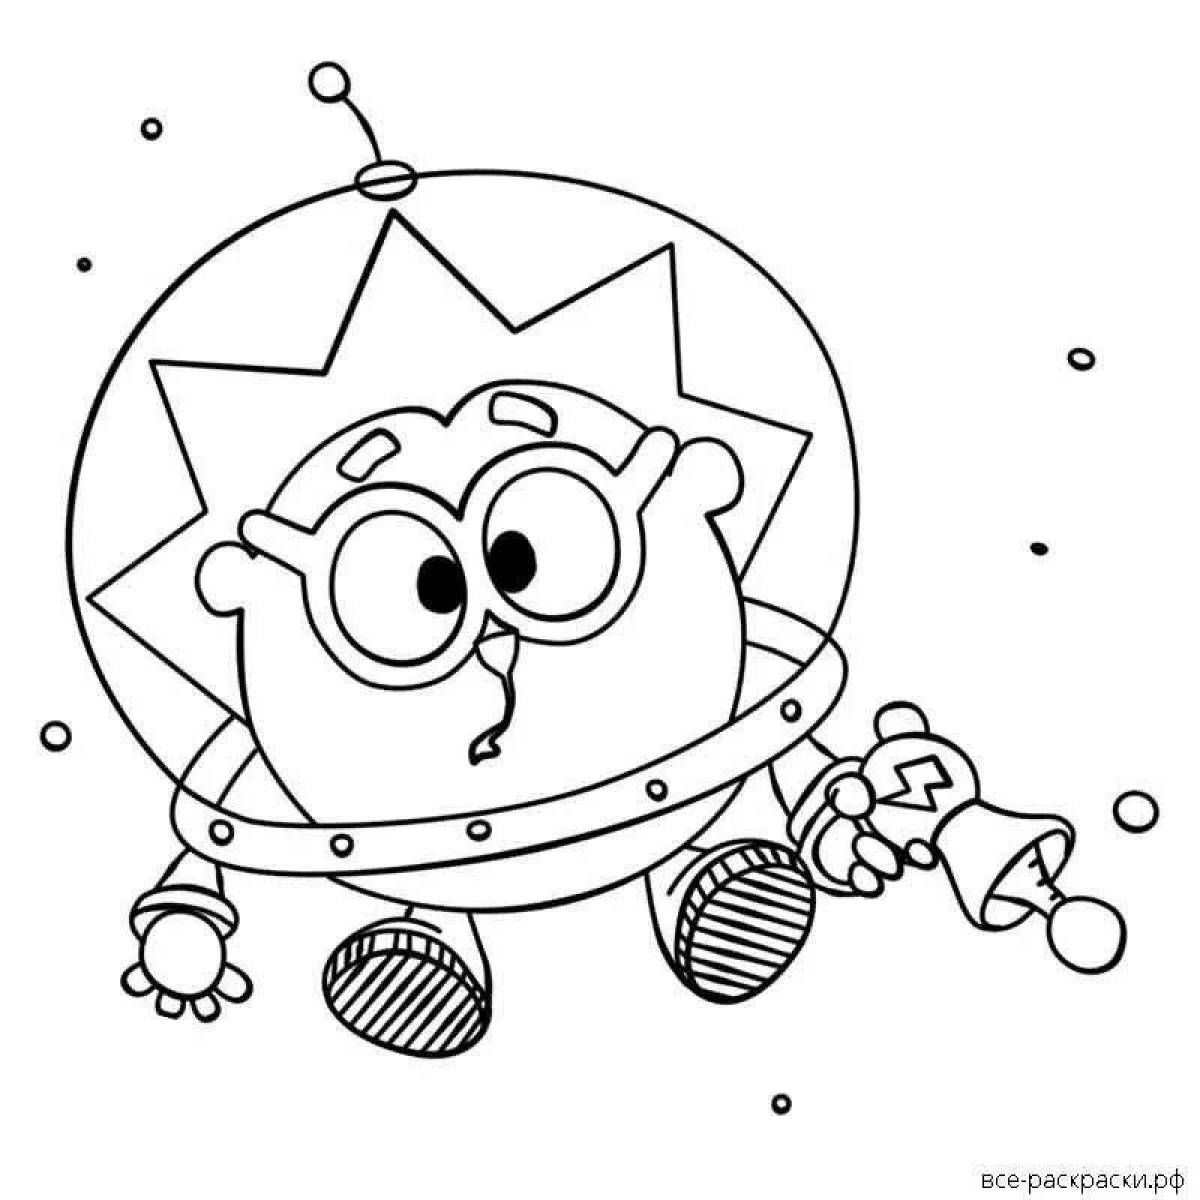 Hedgehog holiday coloring page